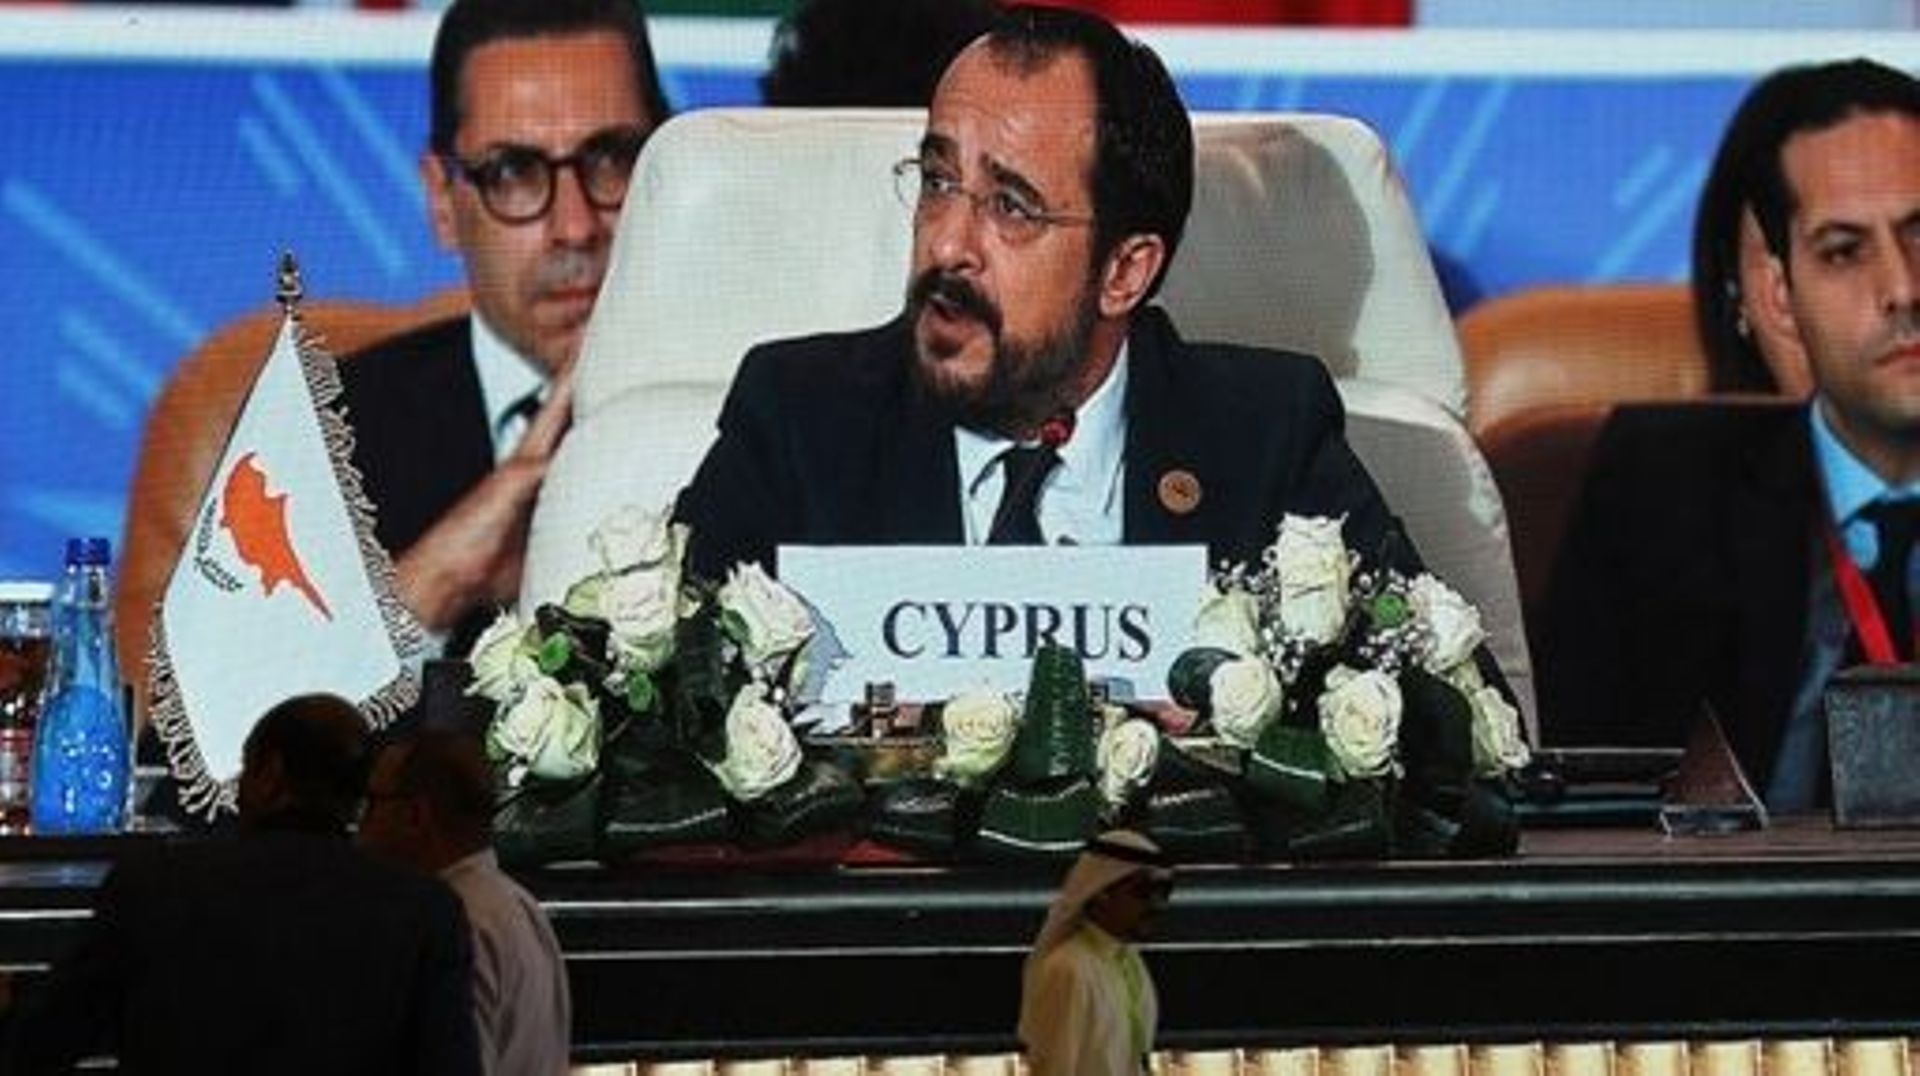 Journalists watch a large screen showing Cyprus' President Nikos Christodoulides addressing the International Peace Summit hosted by the Egyptian president in the New Administrative Capital (NAC), about 45 kilometres east of Cairo, on October 21, 2023, am